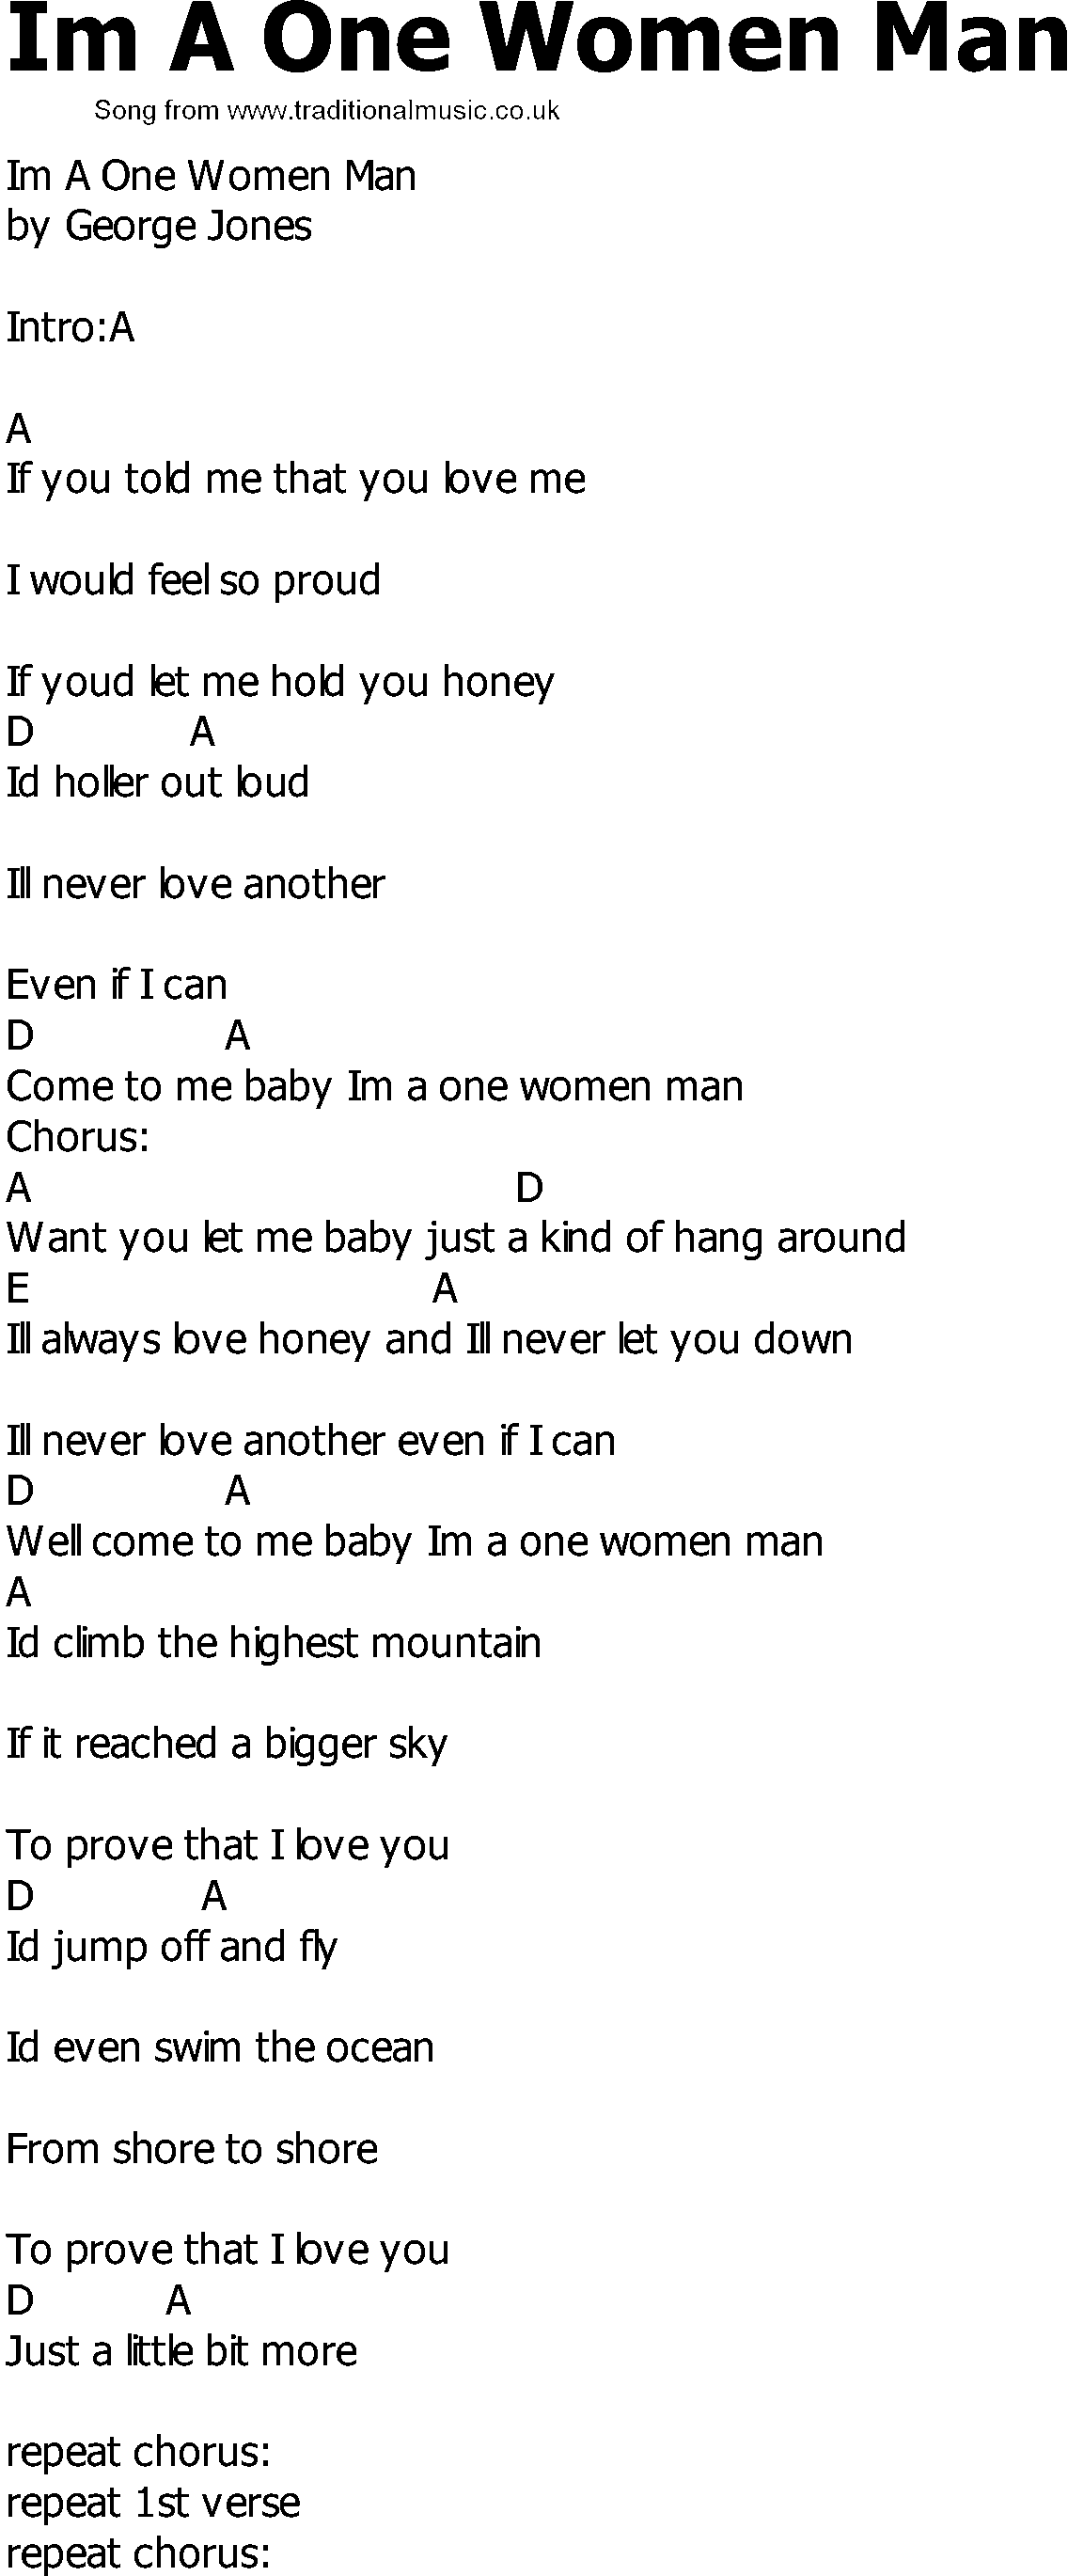 Old Country song lyrics with chords - Im A One Women Man